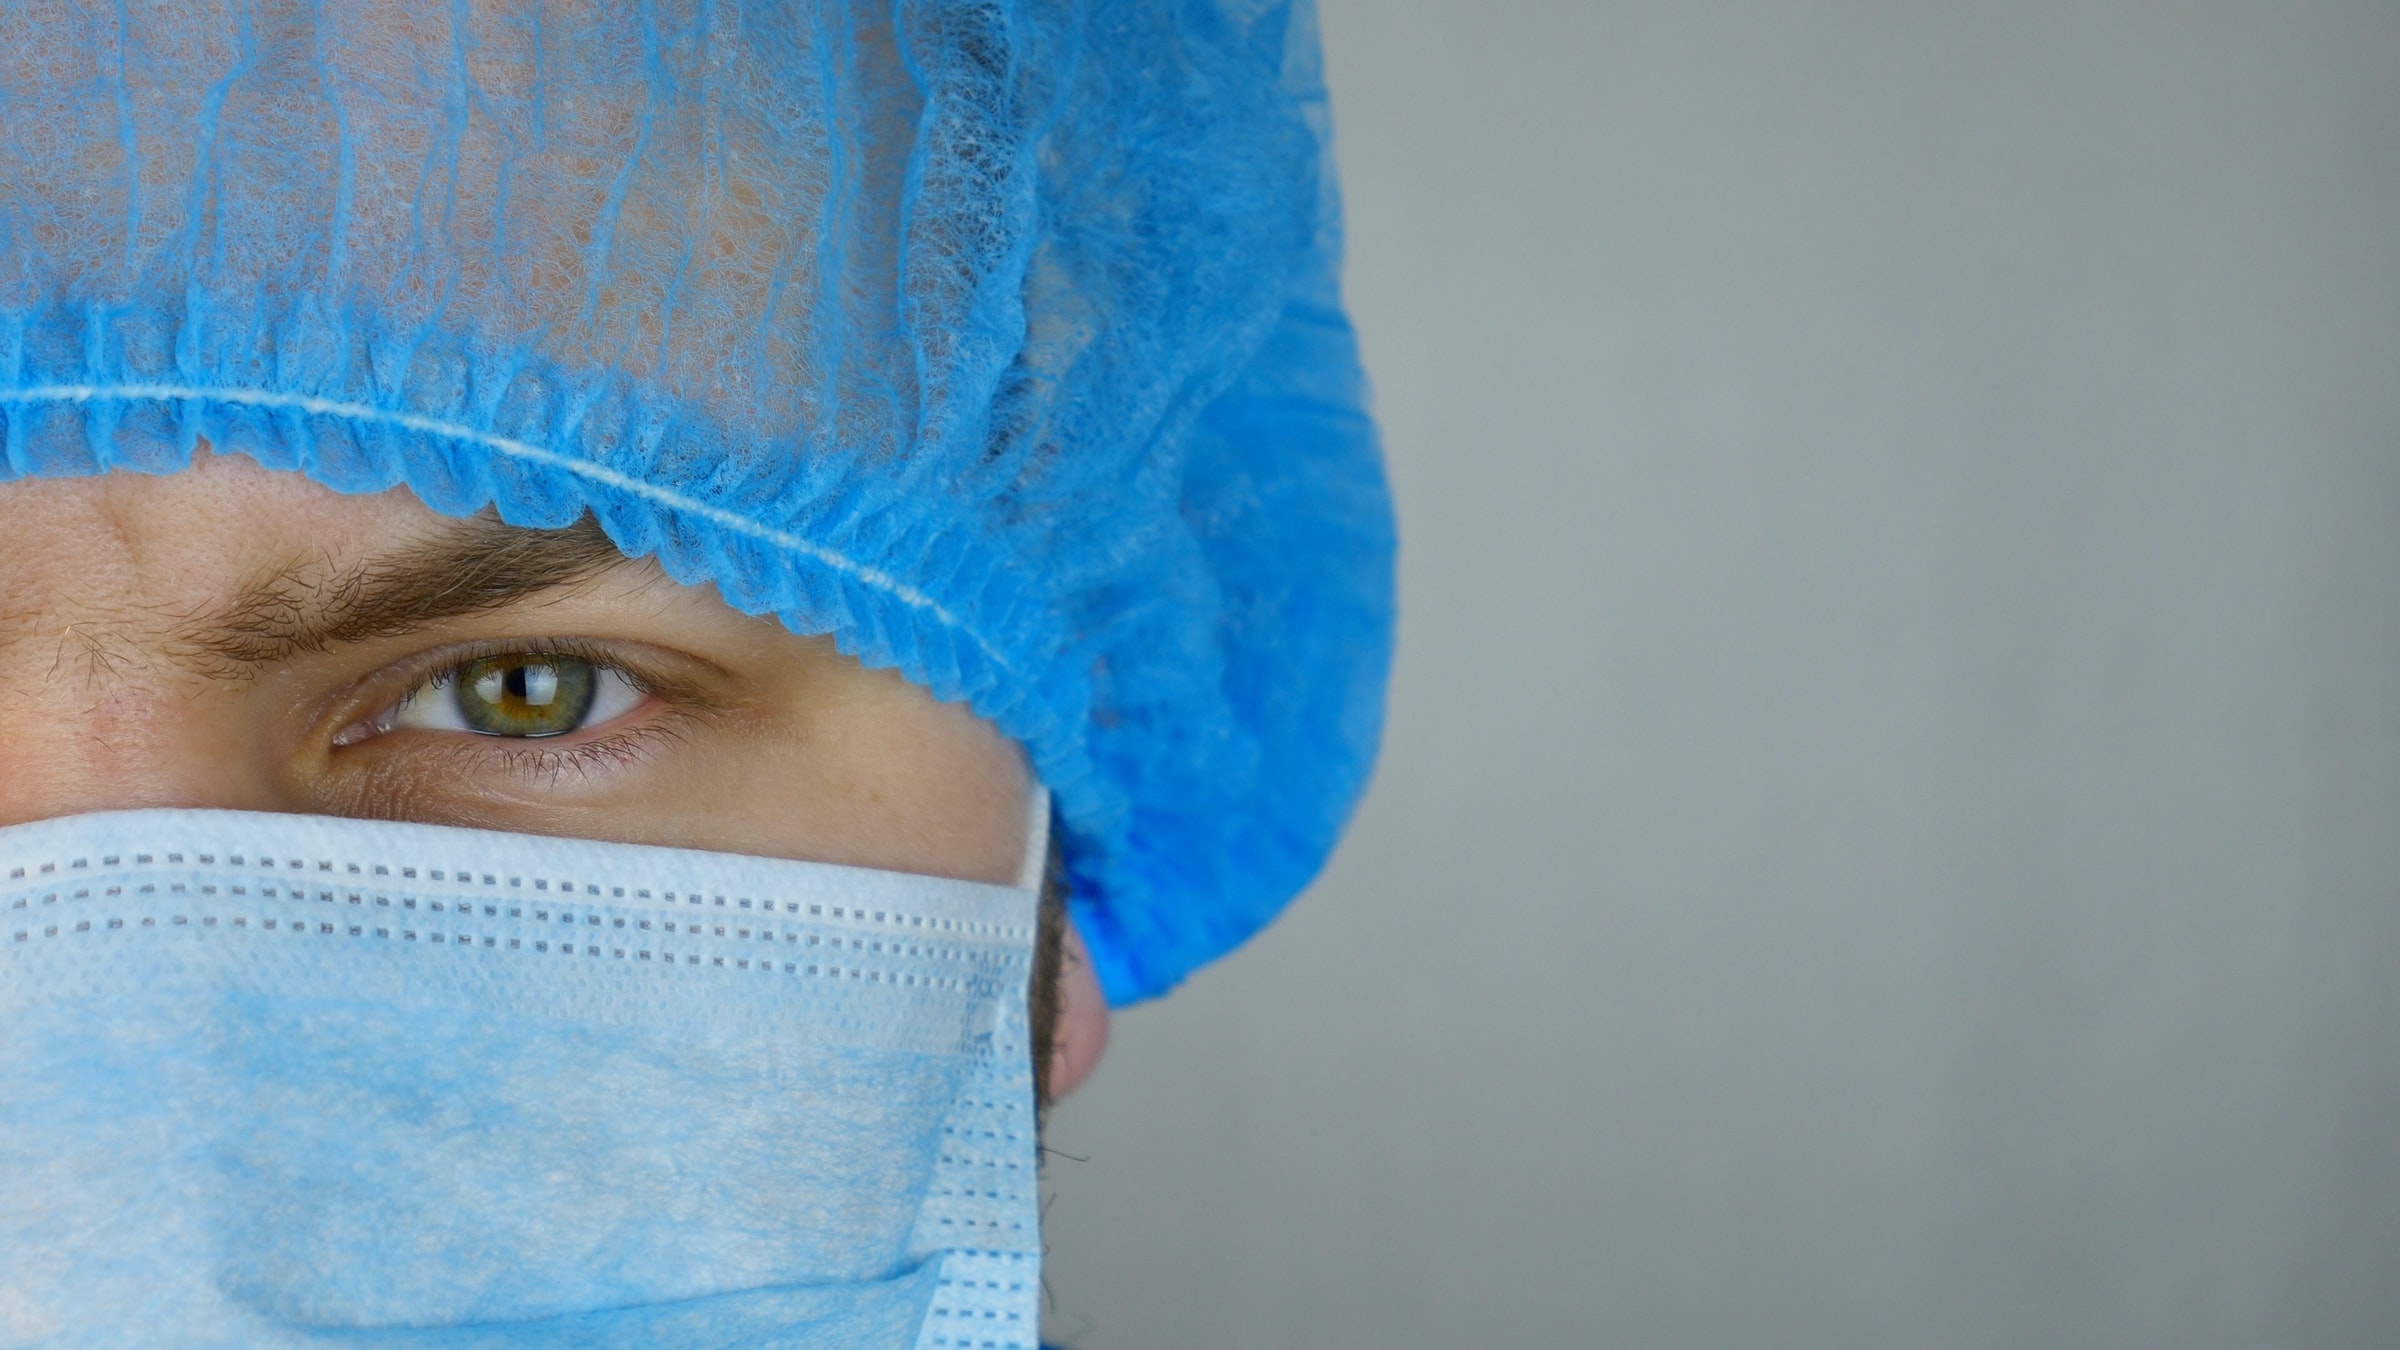 Which fabric is used for surgical masks